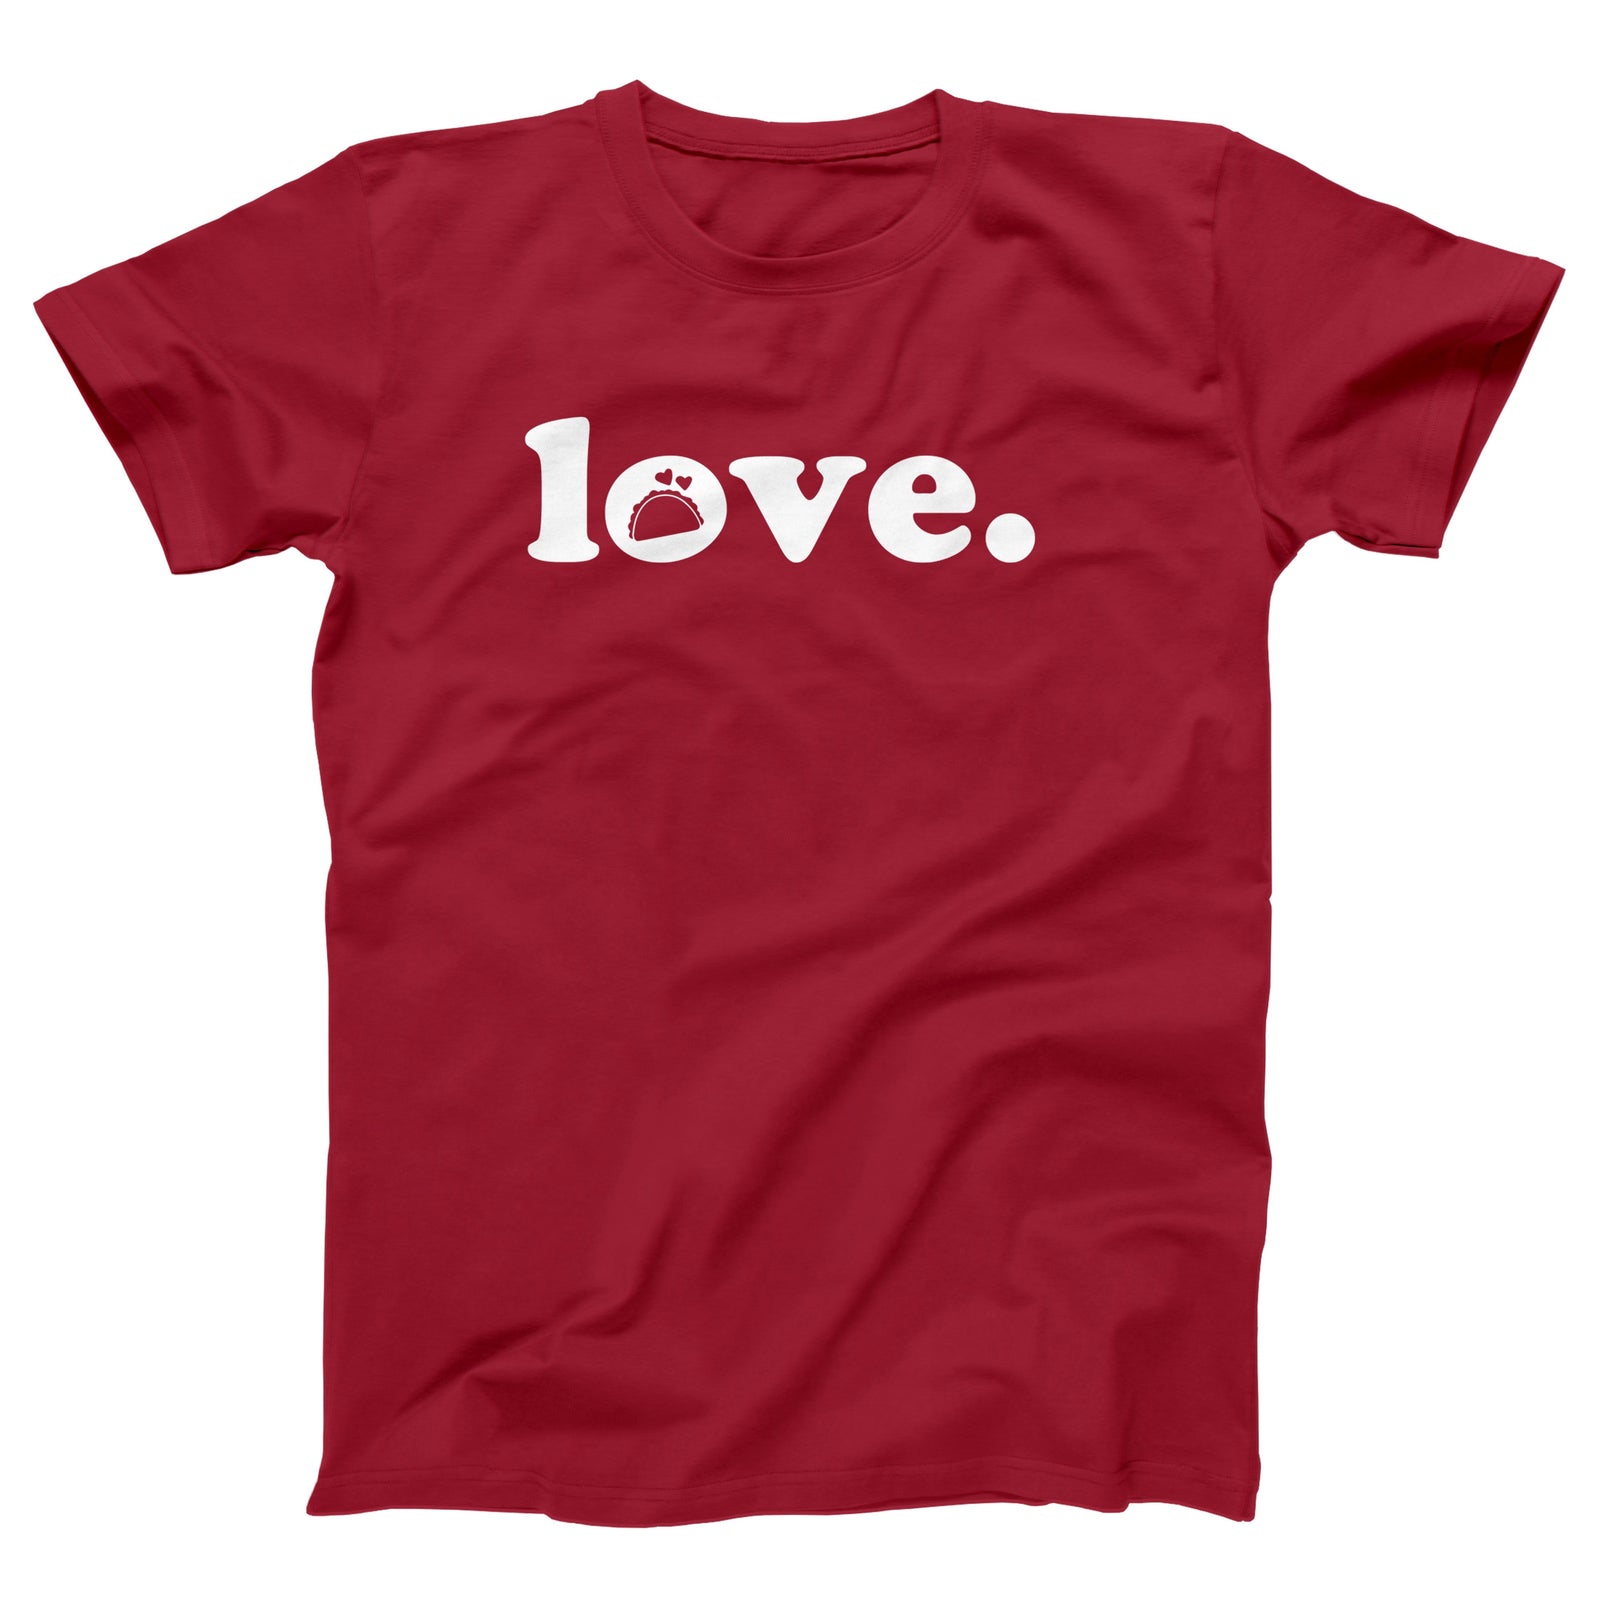 //cdn.shopify.com/s/files/1/0274/2488/2766/products/taco-love-menunisex-t-shirt-481621_5000x.jpg?v=1612009806 5000w,
    //cdn.shopify.com/s/files/1/0274/2488/2766/products/taco-love-menunisex-t-shirt-481621_4500x.jpg?v=1612009806 4500w,
    //cdn.shopify.com/s/files/1/0274/2488/2766/products/taco-love-menunisex-t-shirt-481621_4000x.jpg?v=1612009806 4000w,
    //cdn.shopify.com/s/files/1/0274/2488/2766/products/taco-love-menunisex-t-shirt-481621_3500x.jpg?v=1612009806 3500w,
    //cdn.shopify.com/s/files/1/0274/2488/2766/products/taco-love-menunisex-t-shirt-481621_3000x.jpg?v=1612009806 3000w,
    //cdn.shopify.com/s/files/1/0274/2488/2766/products/taco-love-menunisex-t-shirt-481621_2500x.jpg?v=1612009806 2500w,
    //cdn.shopify.com/s/files/1/0274/2488/2766/products/taco-love-menunisex-t-shirt-481621_2000x.jpg?v=1612009806 2000w,
    //cdn.shopify.com/s/files/1/0274/2488/2766/products/taco-love-menunisex-t-shirt-481621_1800x.jpg?v=1612009806 1800w,
    //cdn.shopify.com/s/files/1/0274/2488/2766/products/taco-love-menunisex-t-shirt-481621_1600x.jpg?v=1612009806 1600w,
    //cdn.shopify.com/s/files/1/0274/2488/2766/products/taco-love-menunisex-t-shirt-481621_1400x.jpg?v=1612009806 1400w,
    //cdn.shopify.com/s/files/1/0274/2488/2766/products/taco-love-menunisex-t-shirt-481621_1200x.jpg?v=1612009806 1200w,
    //cdn.shopify.com/s/files/1/0274/2488/2766/products/taco-love-menunisex-t-shirt-481621_1000x.jpg?v=1612009806 1000w,
    //cdn.shopify.com/s/files/1/0274/2488/2766/products/taco-love-menunisex-t-shirt-481621_800x.jpg?v=1612009806 800w,
    //cdn.shopify.com/s/files/1/0274/2488/2766/products/taco-love-menunisex-t-shirt-481621_600x.jpg?v=1612009806 600w,
    //cdn.shopify.com/s/files/1/0274/2488/2766/products/taco-love-menunisex-t-shirt-481621_400x.jpg?v=1612009806 400w,
    //cdn.shopify.com/s/files/1/0274/2488/2766/products/taco-love-menunisex-t-shirt-481621_200x.jpg?v=1612009806 200w